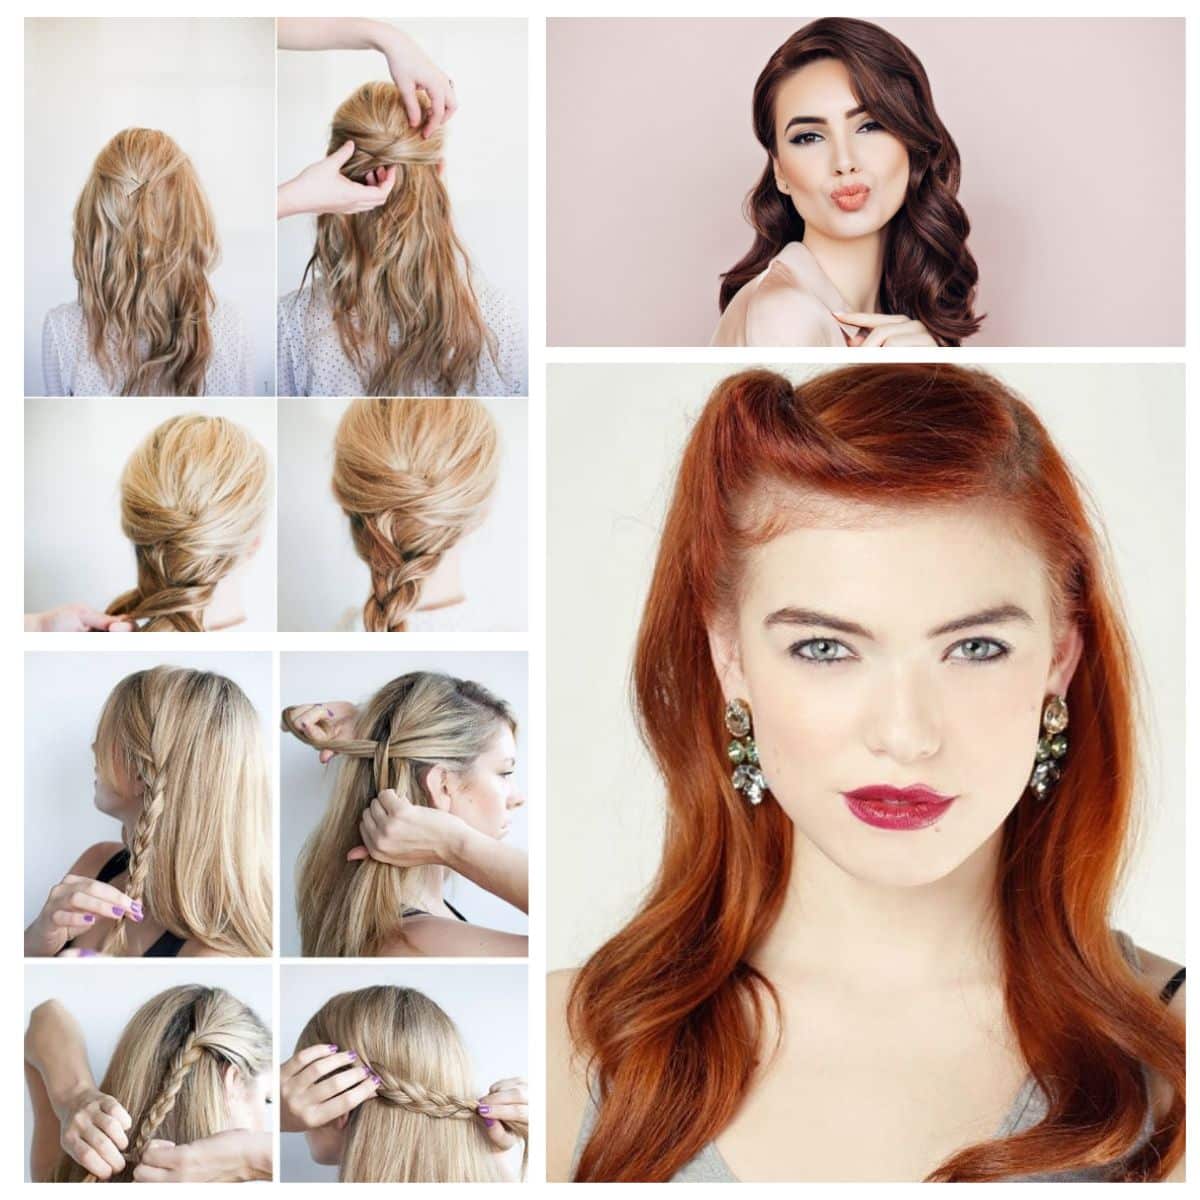 7 Quick & Easy Hairstyles, Part 2 | Hairstyles For Girls - Princess  Hairstyles